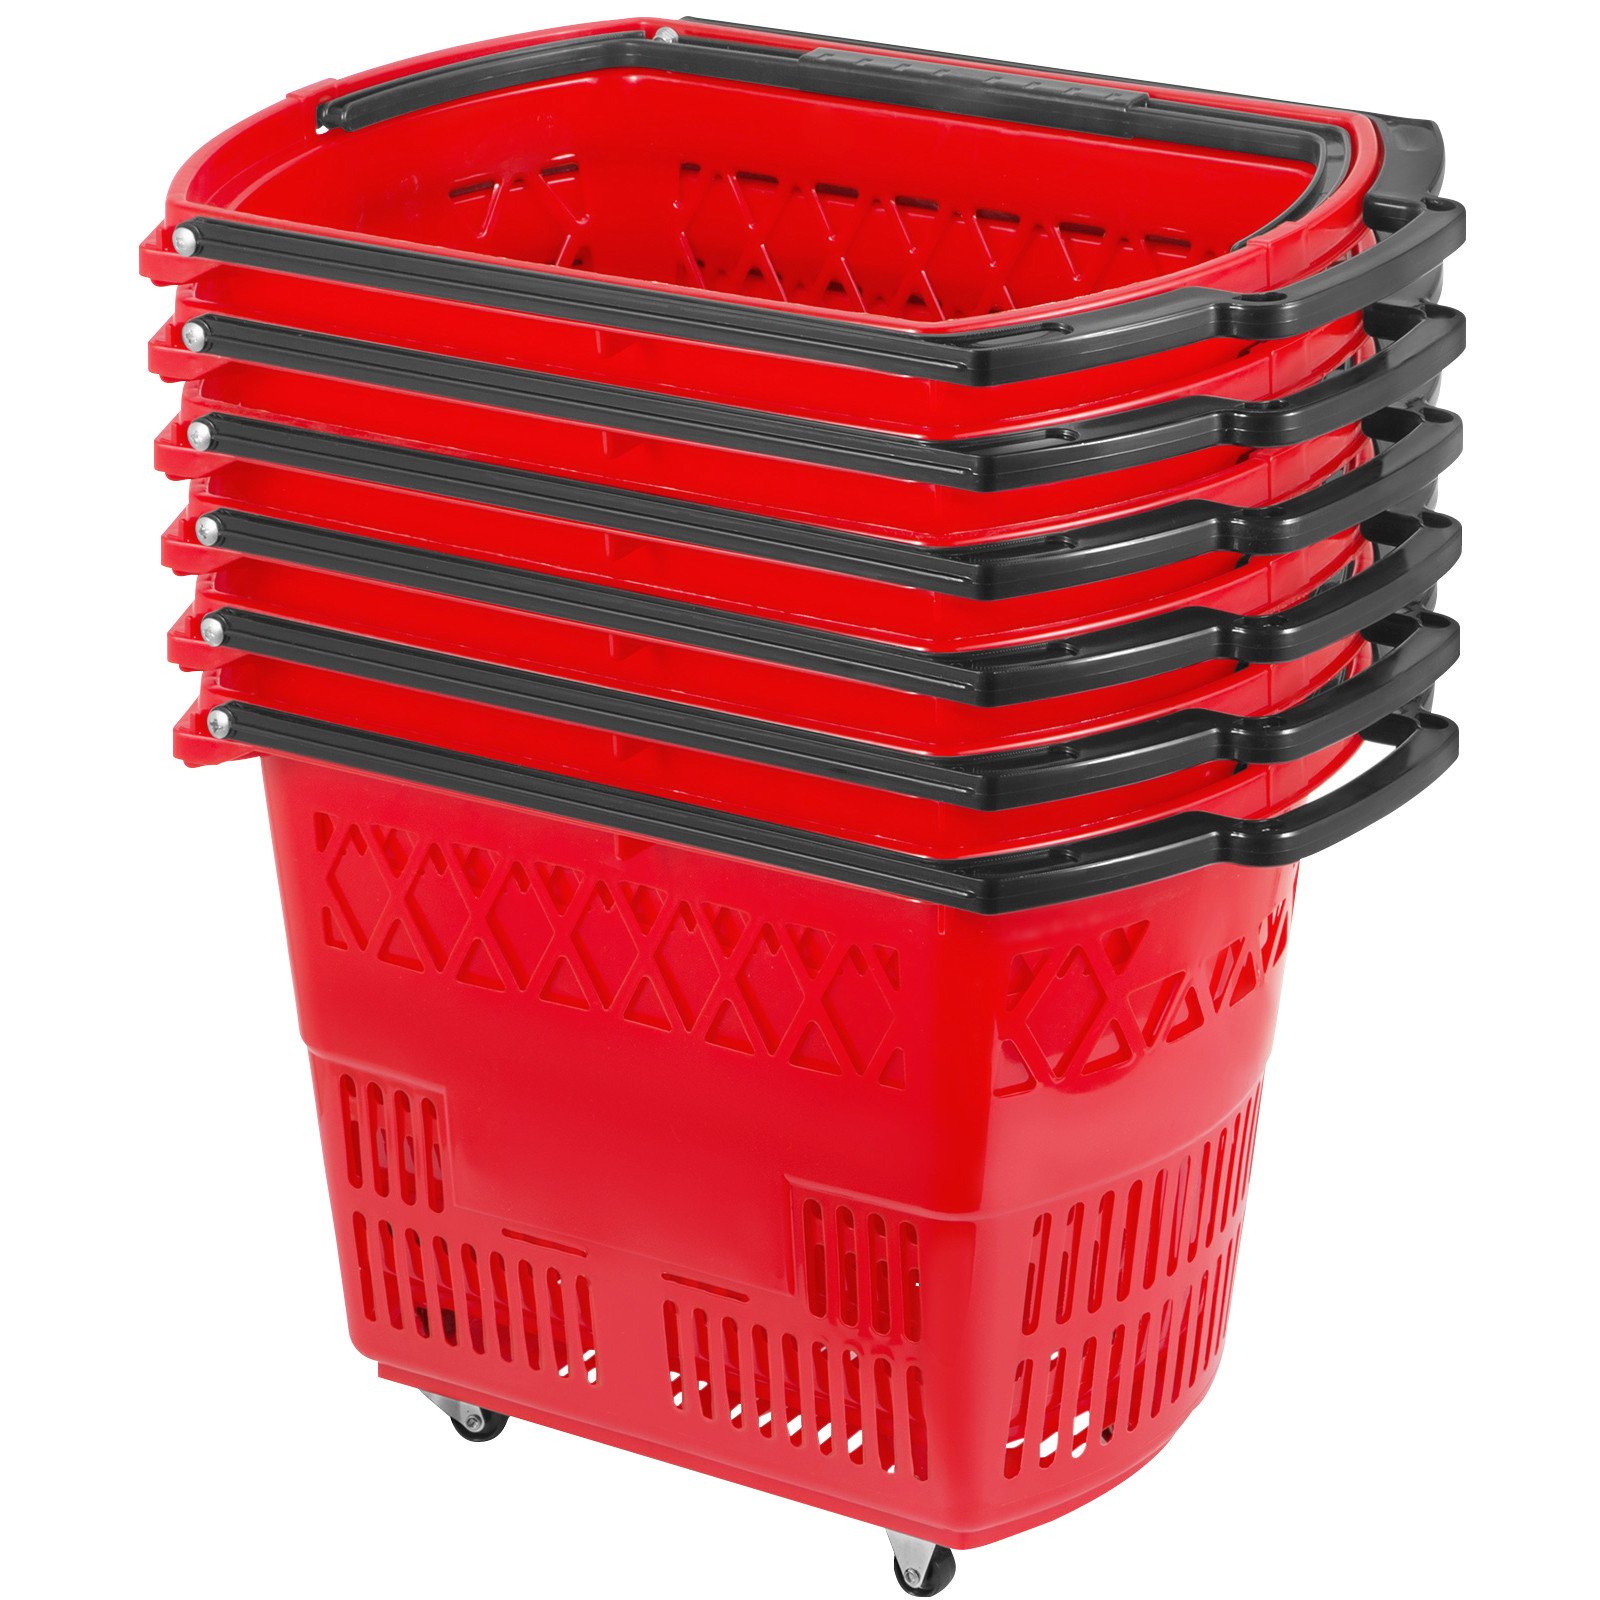 16.9 x 11.8 x 8.7 in/42.8 x 30 x 22 cm L x W x H VEVOR Shopping Basket Blue Retail Set of 12 Store Baskets with Durable PE Material Used for Supermarket Bookstore Plastic Handle and Iron Stand 